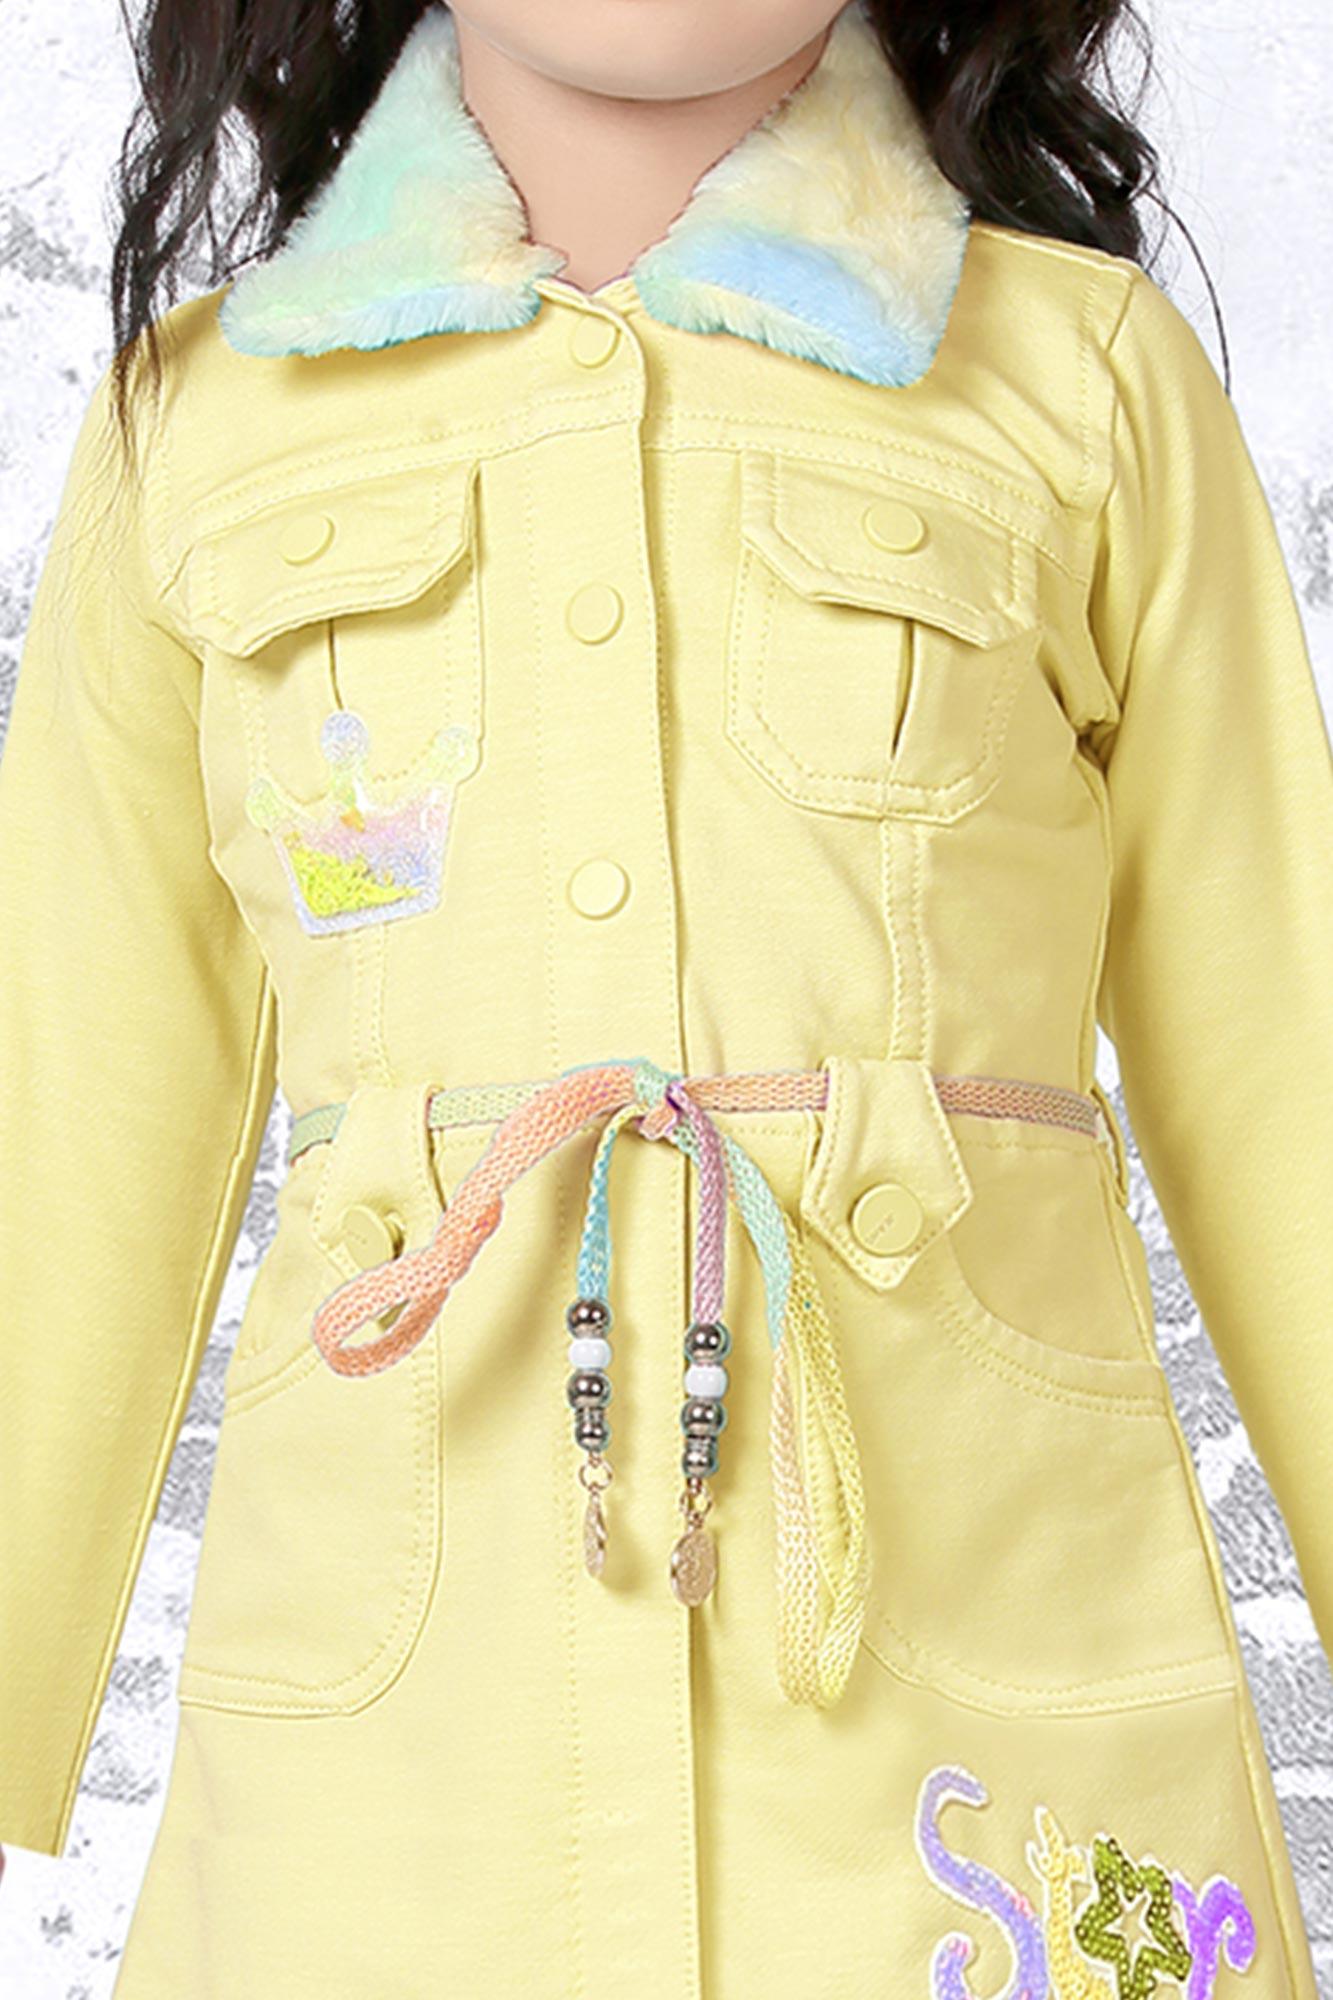 Yellow trench coat style dress for your girl - Lagorii Kids